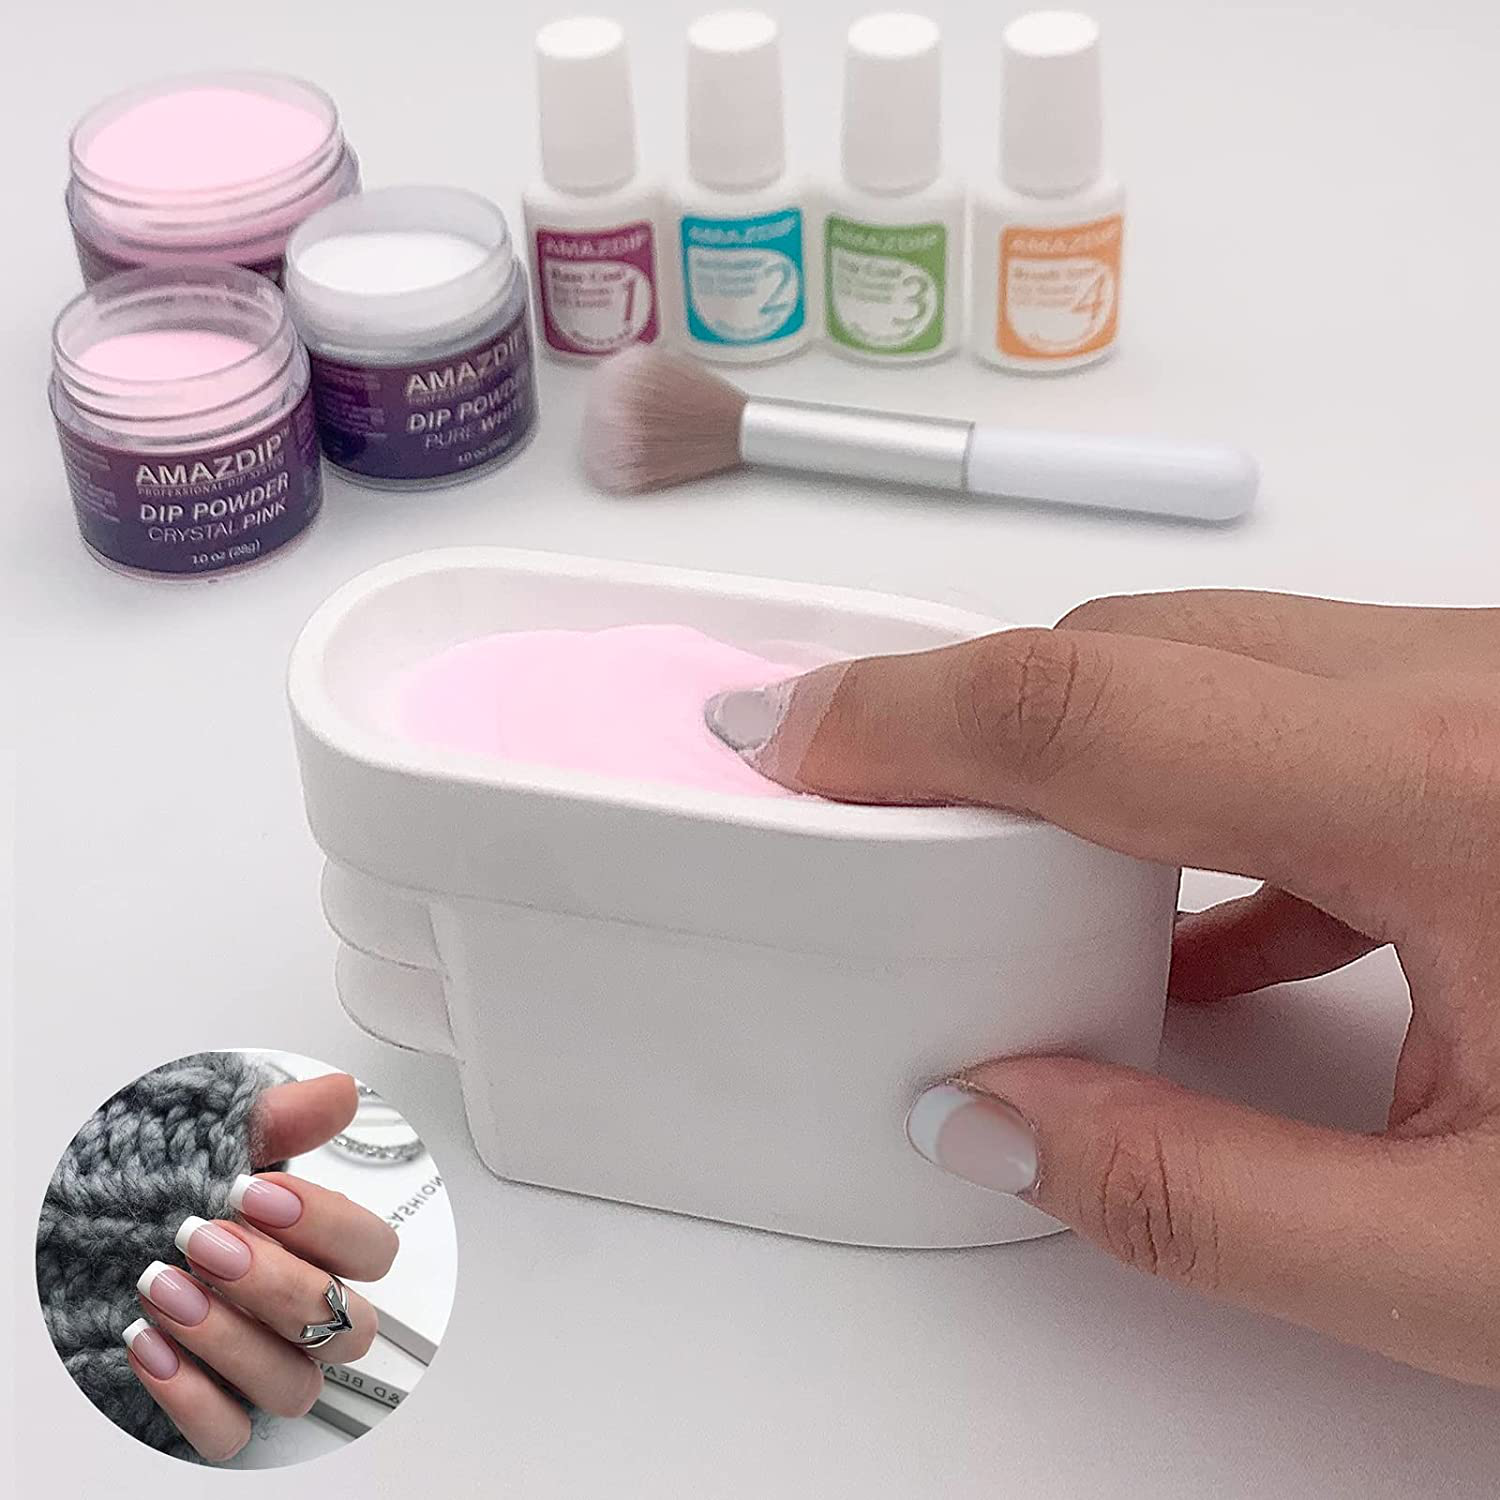 2-In-1 Multi Dip Powder Recycling Tray System with Scoop & French Dip Nail Tray with Dust Cleaning Brush, AMAZDIP Dipping Powder Nail Glitter Holder Saver Manicure Accessories, Combo Design - White